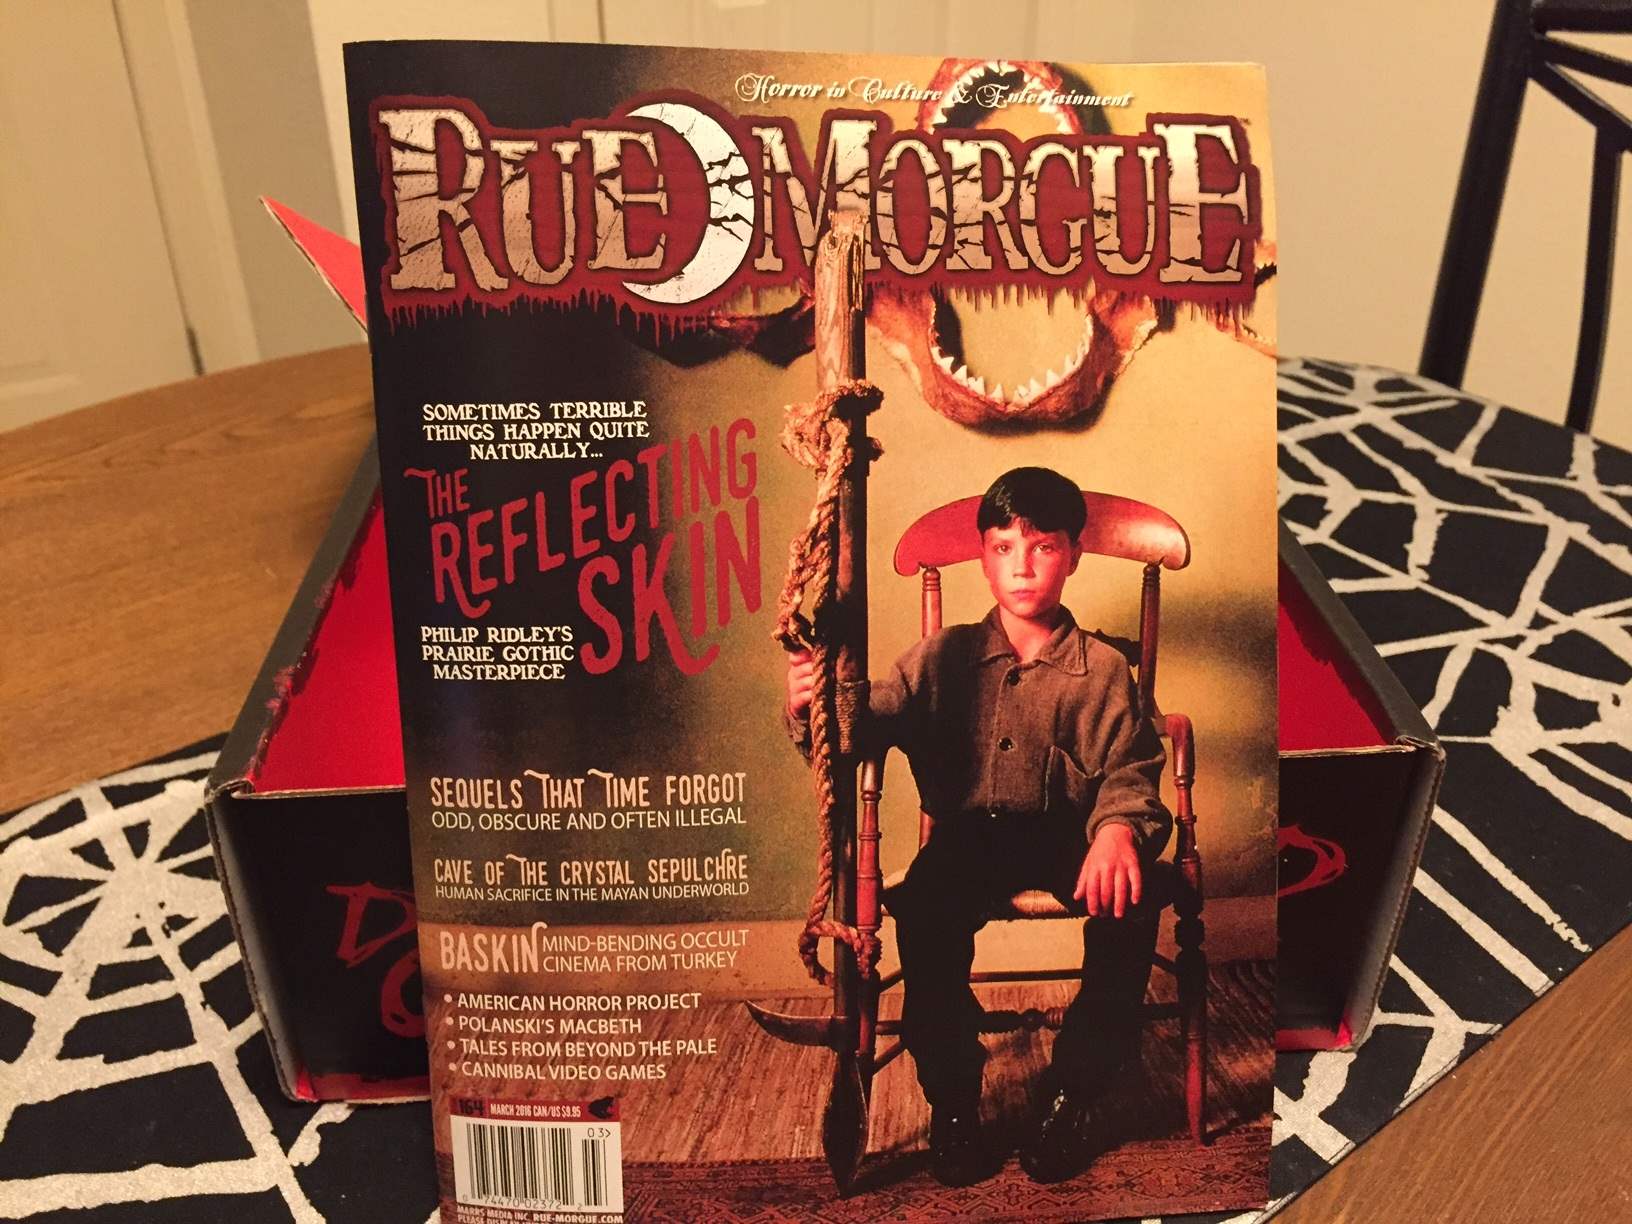 The March issue of Rue Morgue magazine in February 2016's Horror Block